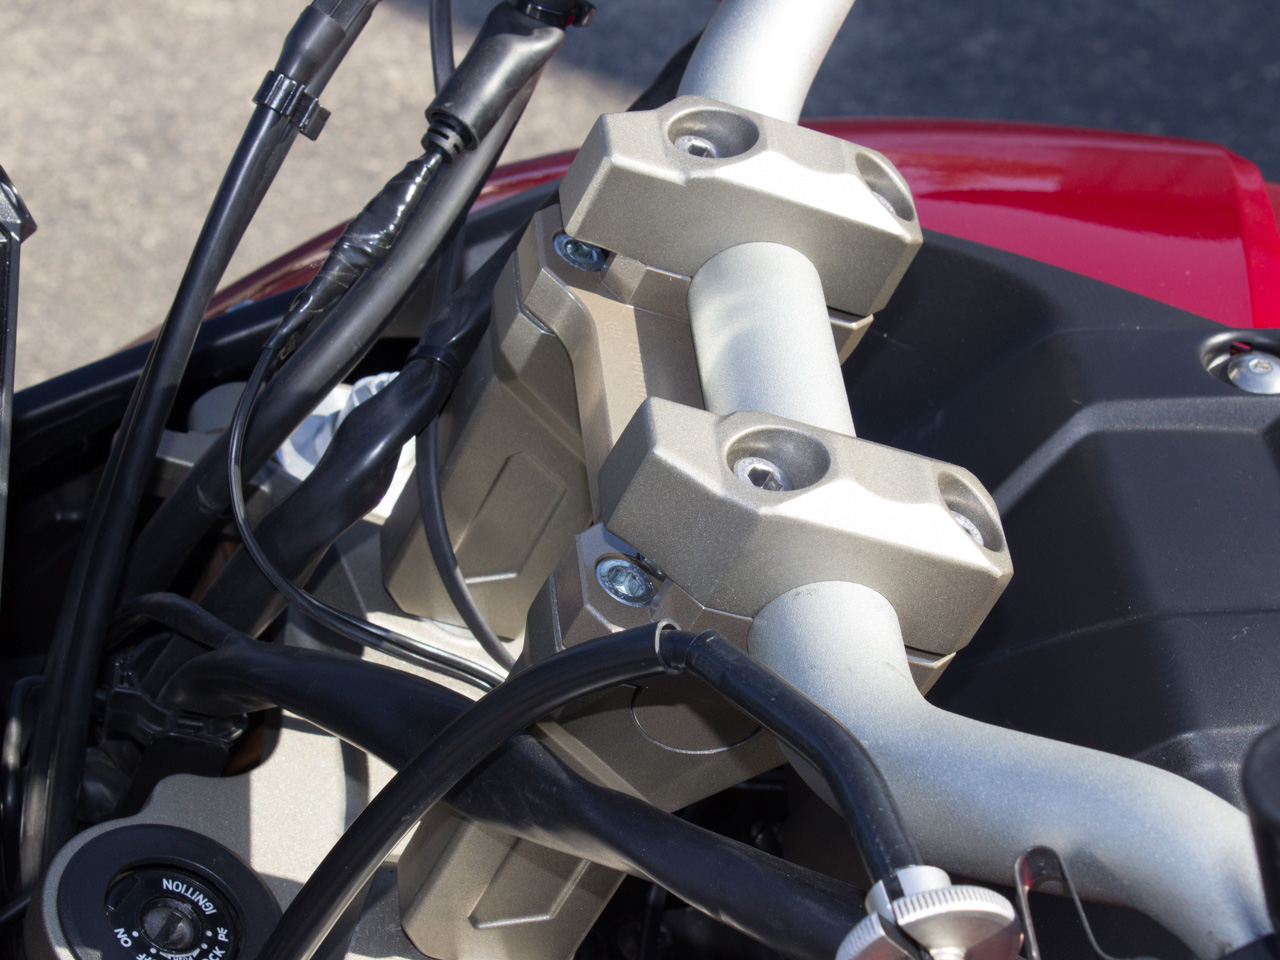 Tour Performance Handlebar Relocation Adapter Risers - For Yamaha FJ-09 - Click Image to Close